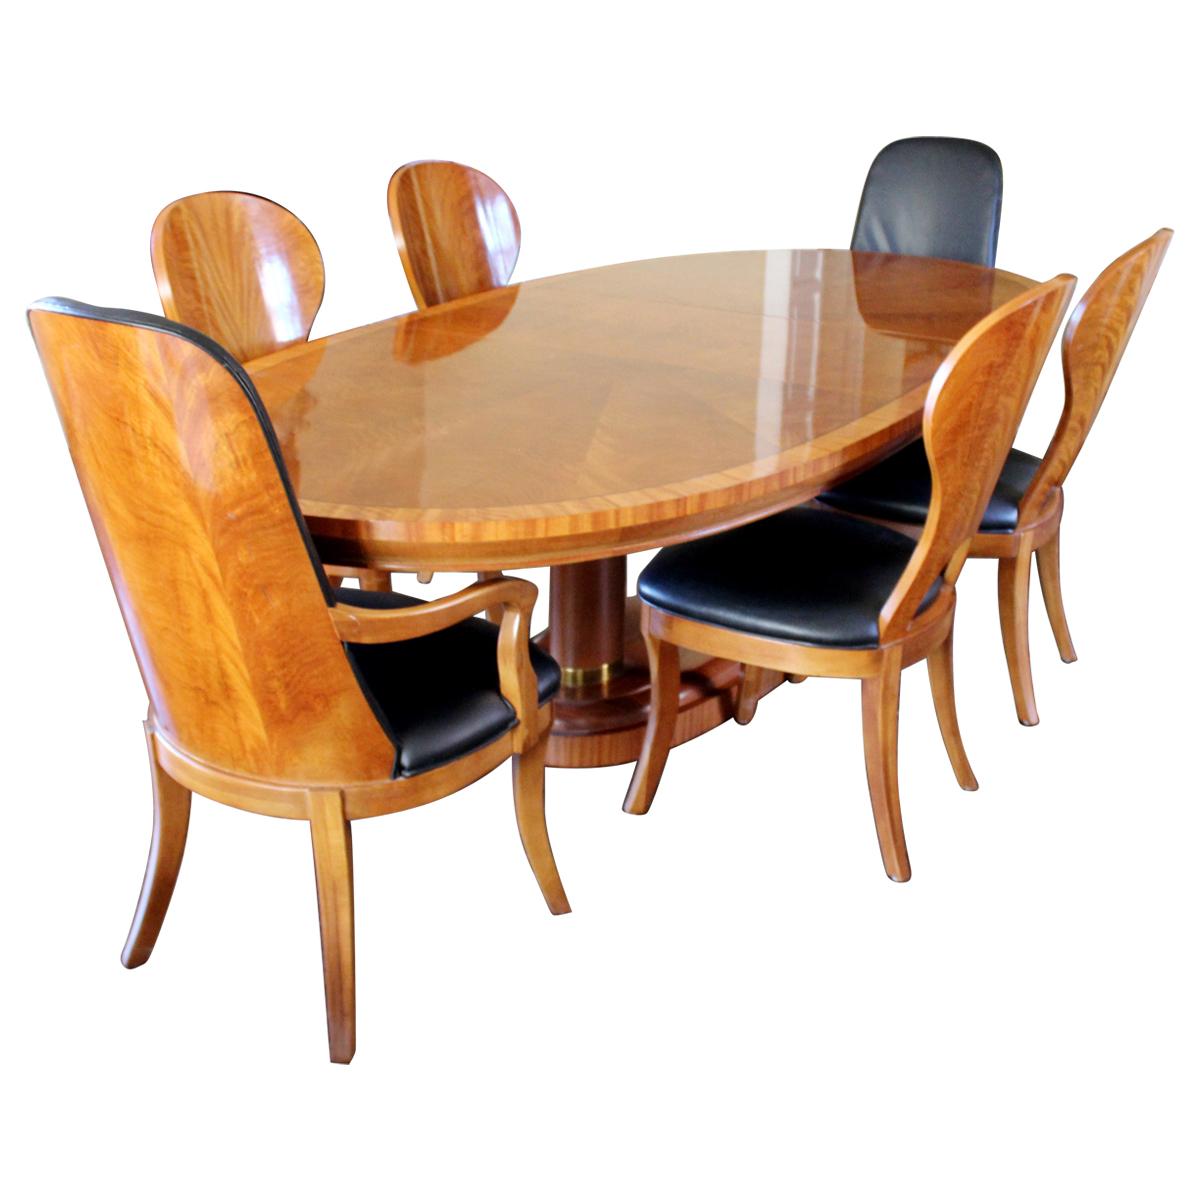 Contemporary Deco Style Double Pedestal Dining Table with Six Chairs Henredon